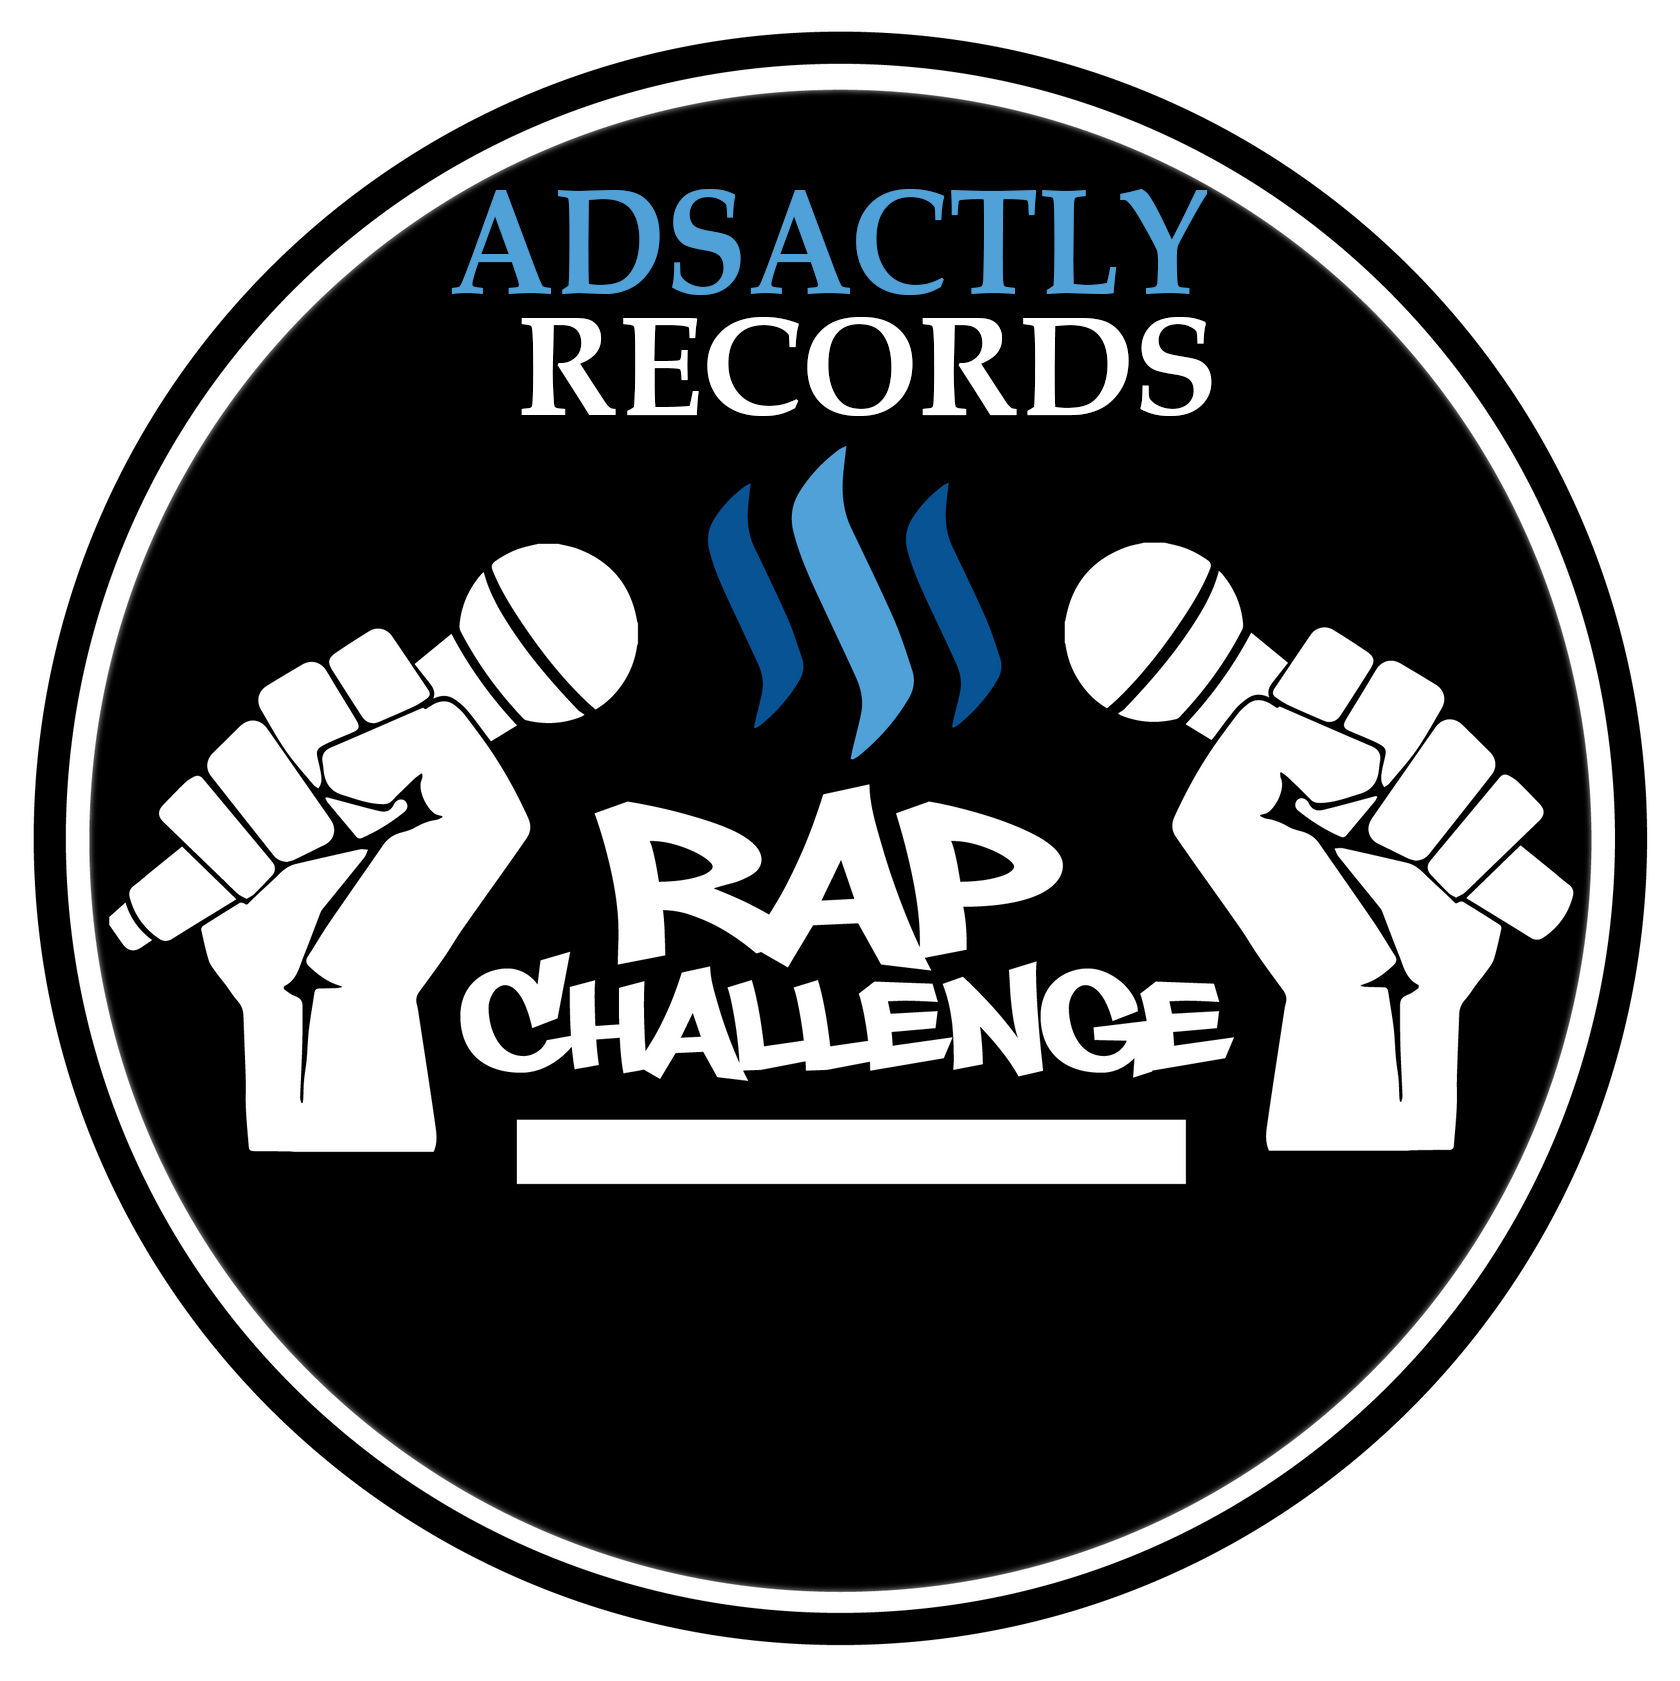 adsactly-rap-challenge.png